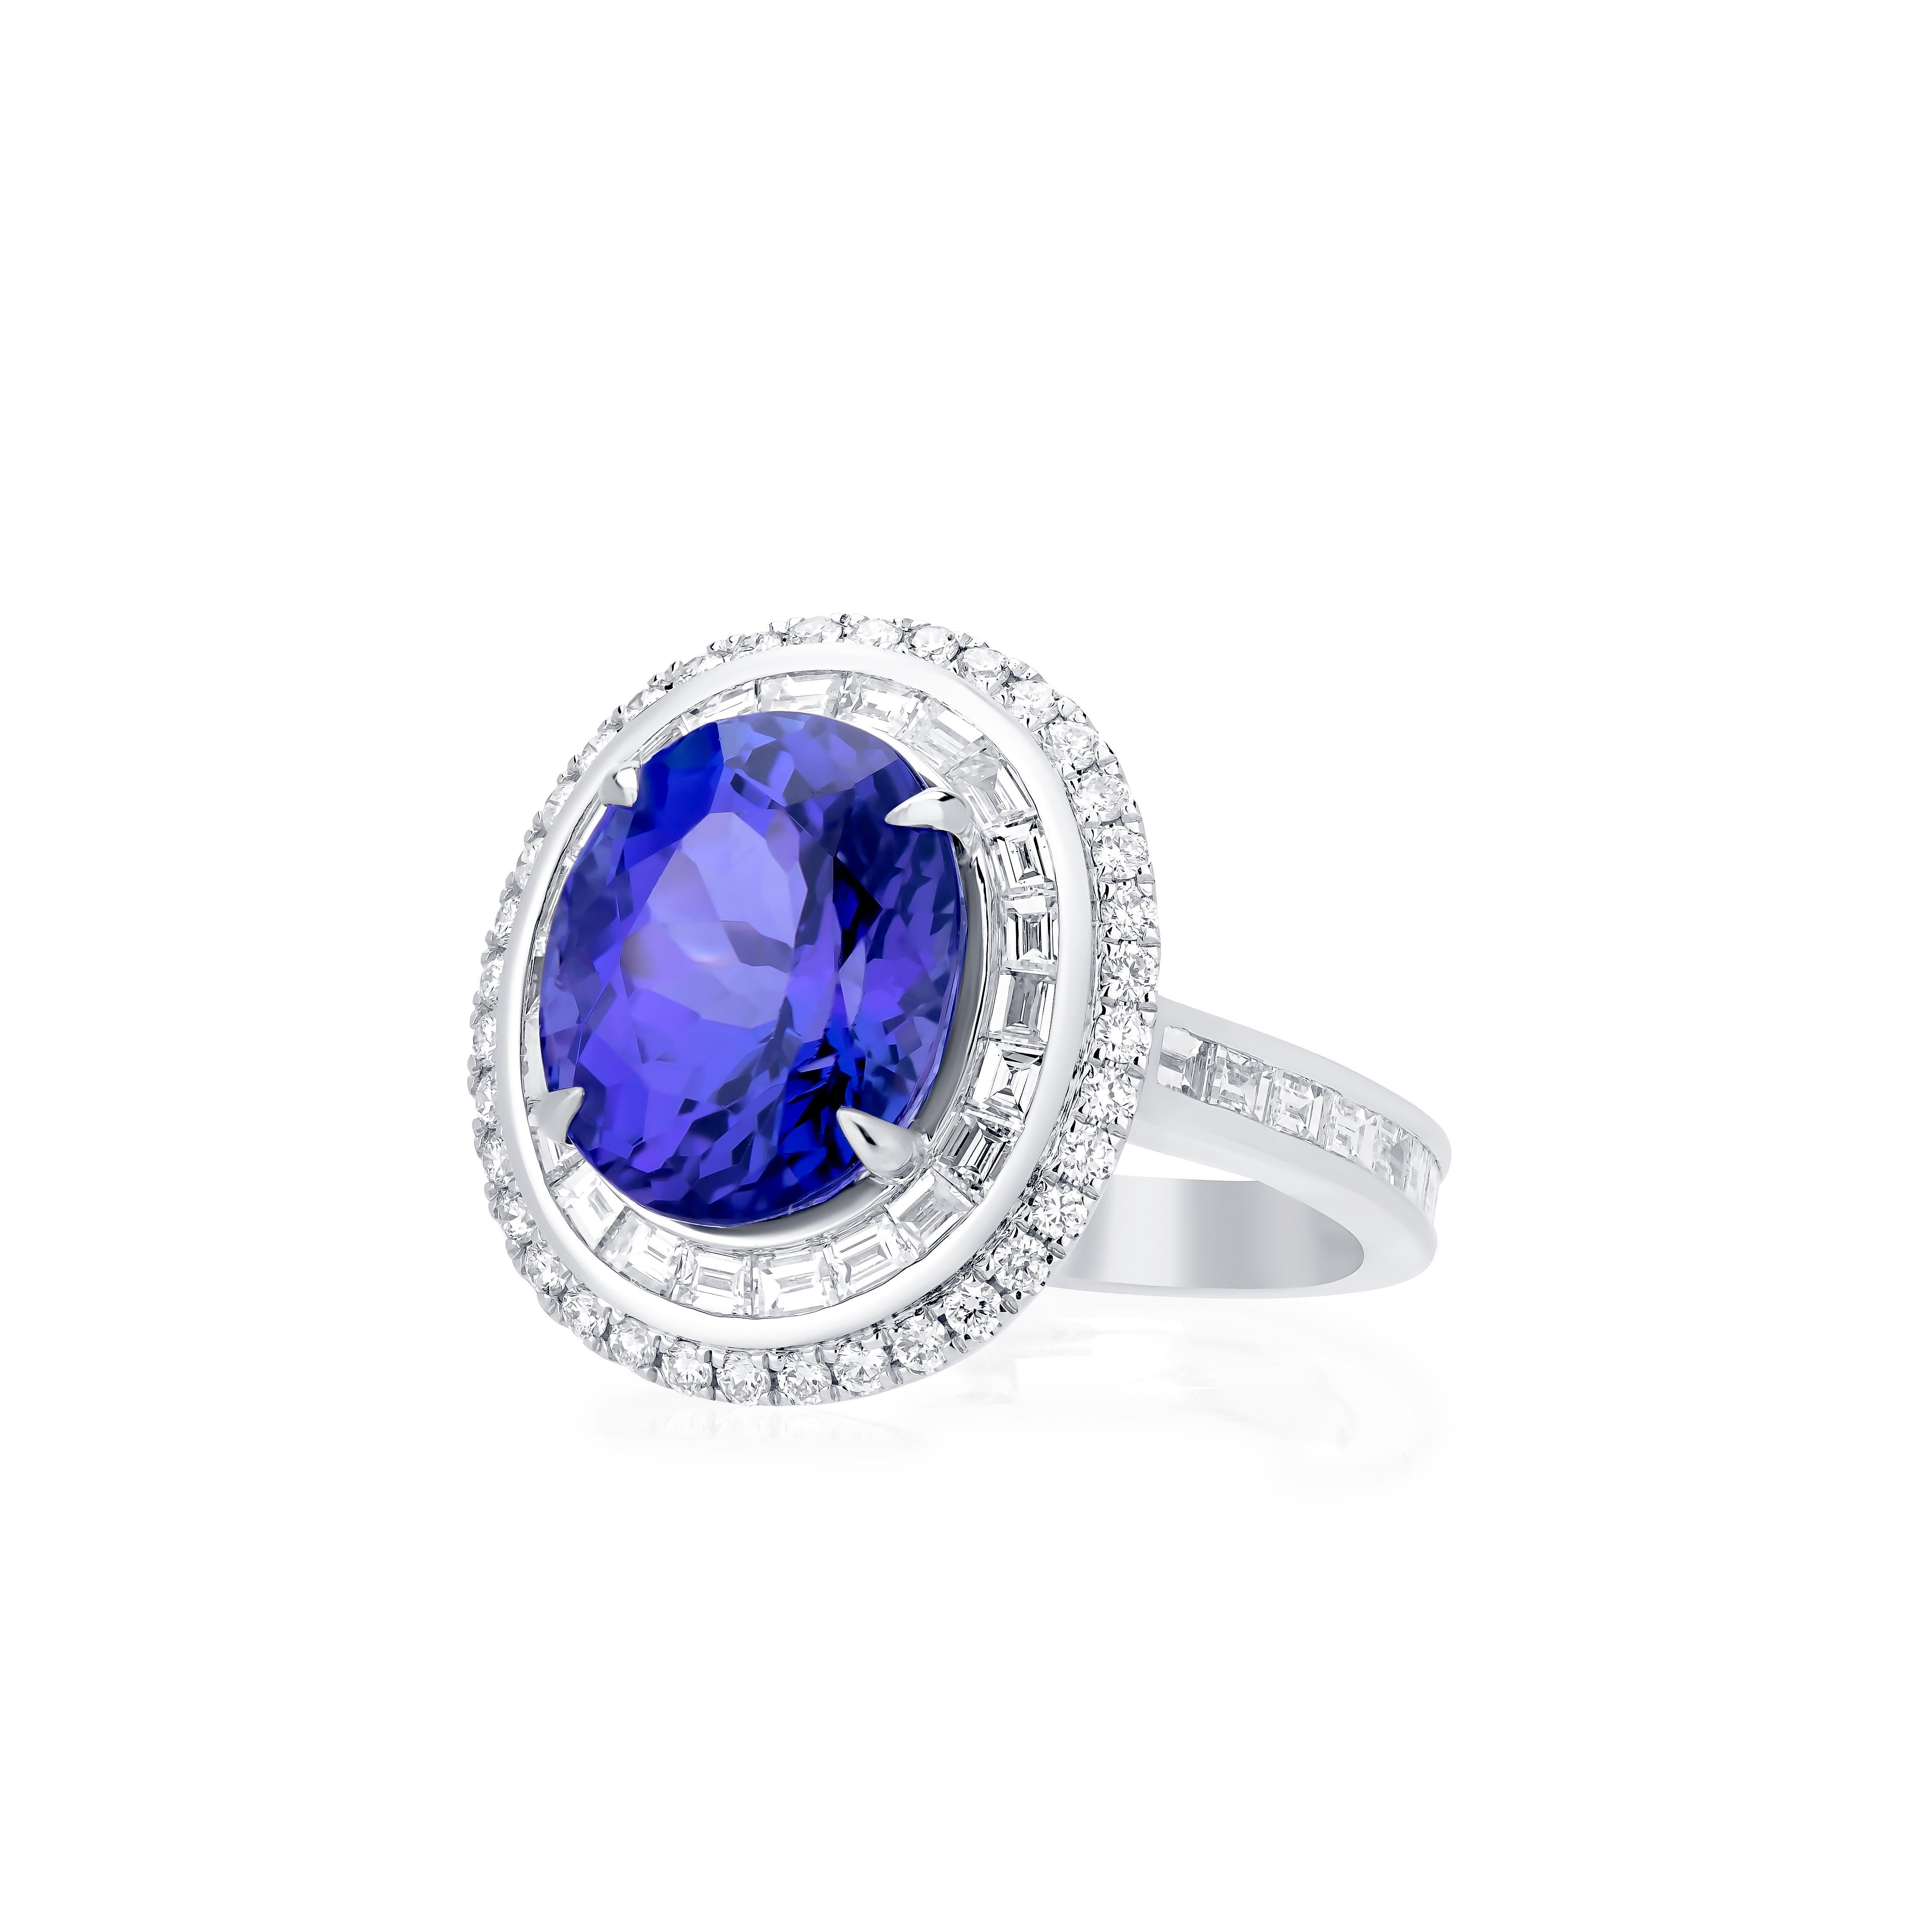 Nigaam 5.41cts. Oval Tanzanite and 1.25Cts. Diamond Cluster Ring in 18k Gold In New Condition For Sale In New York, NY